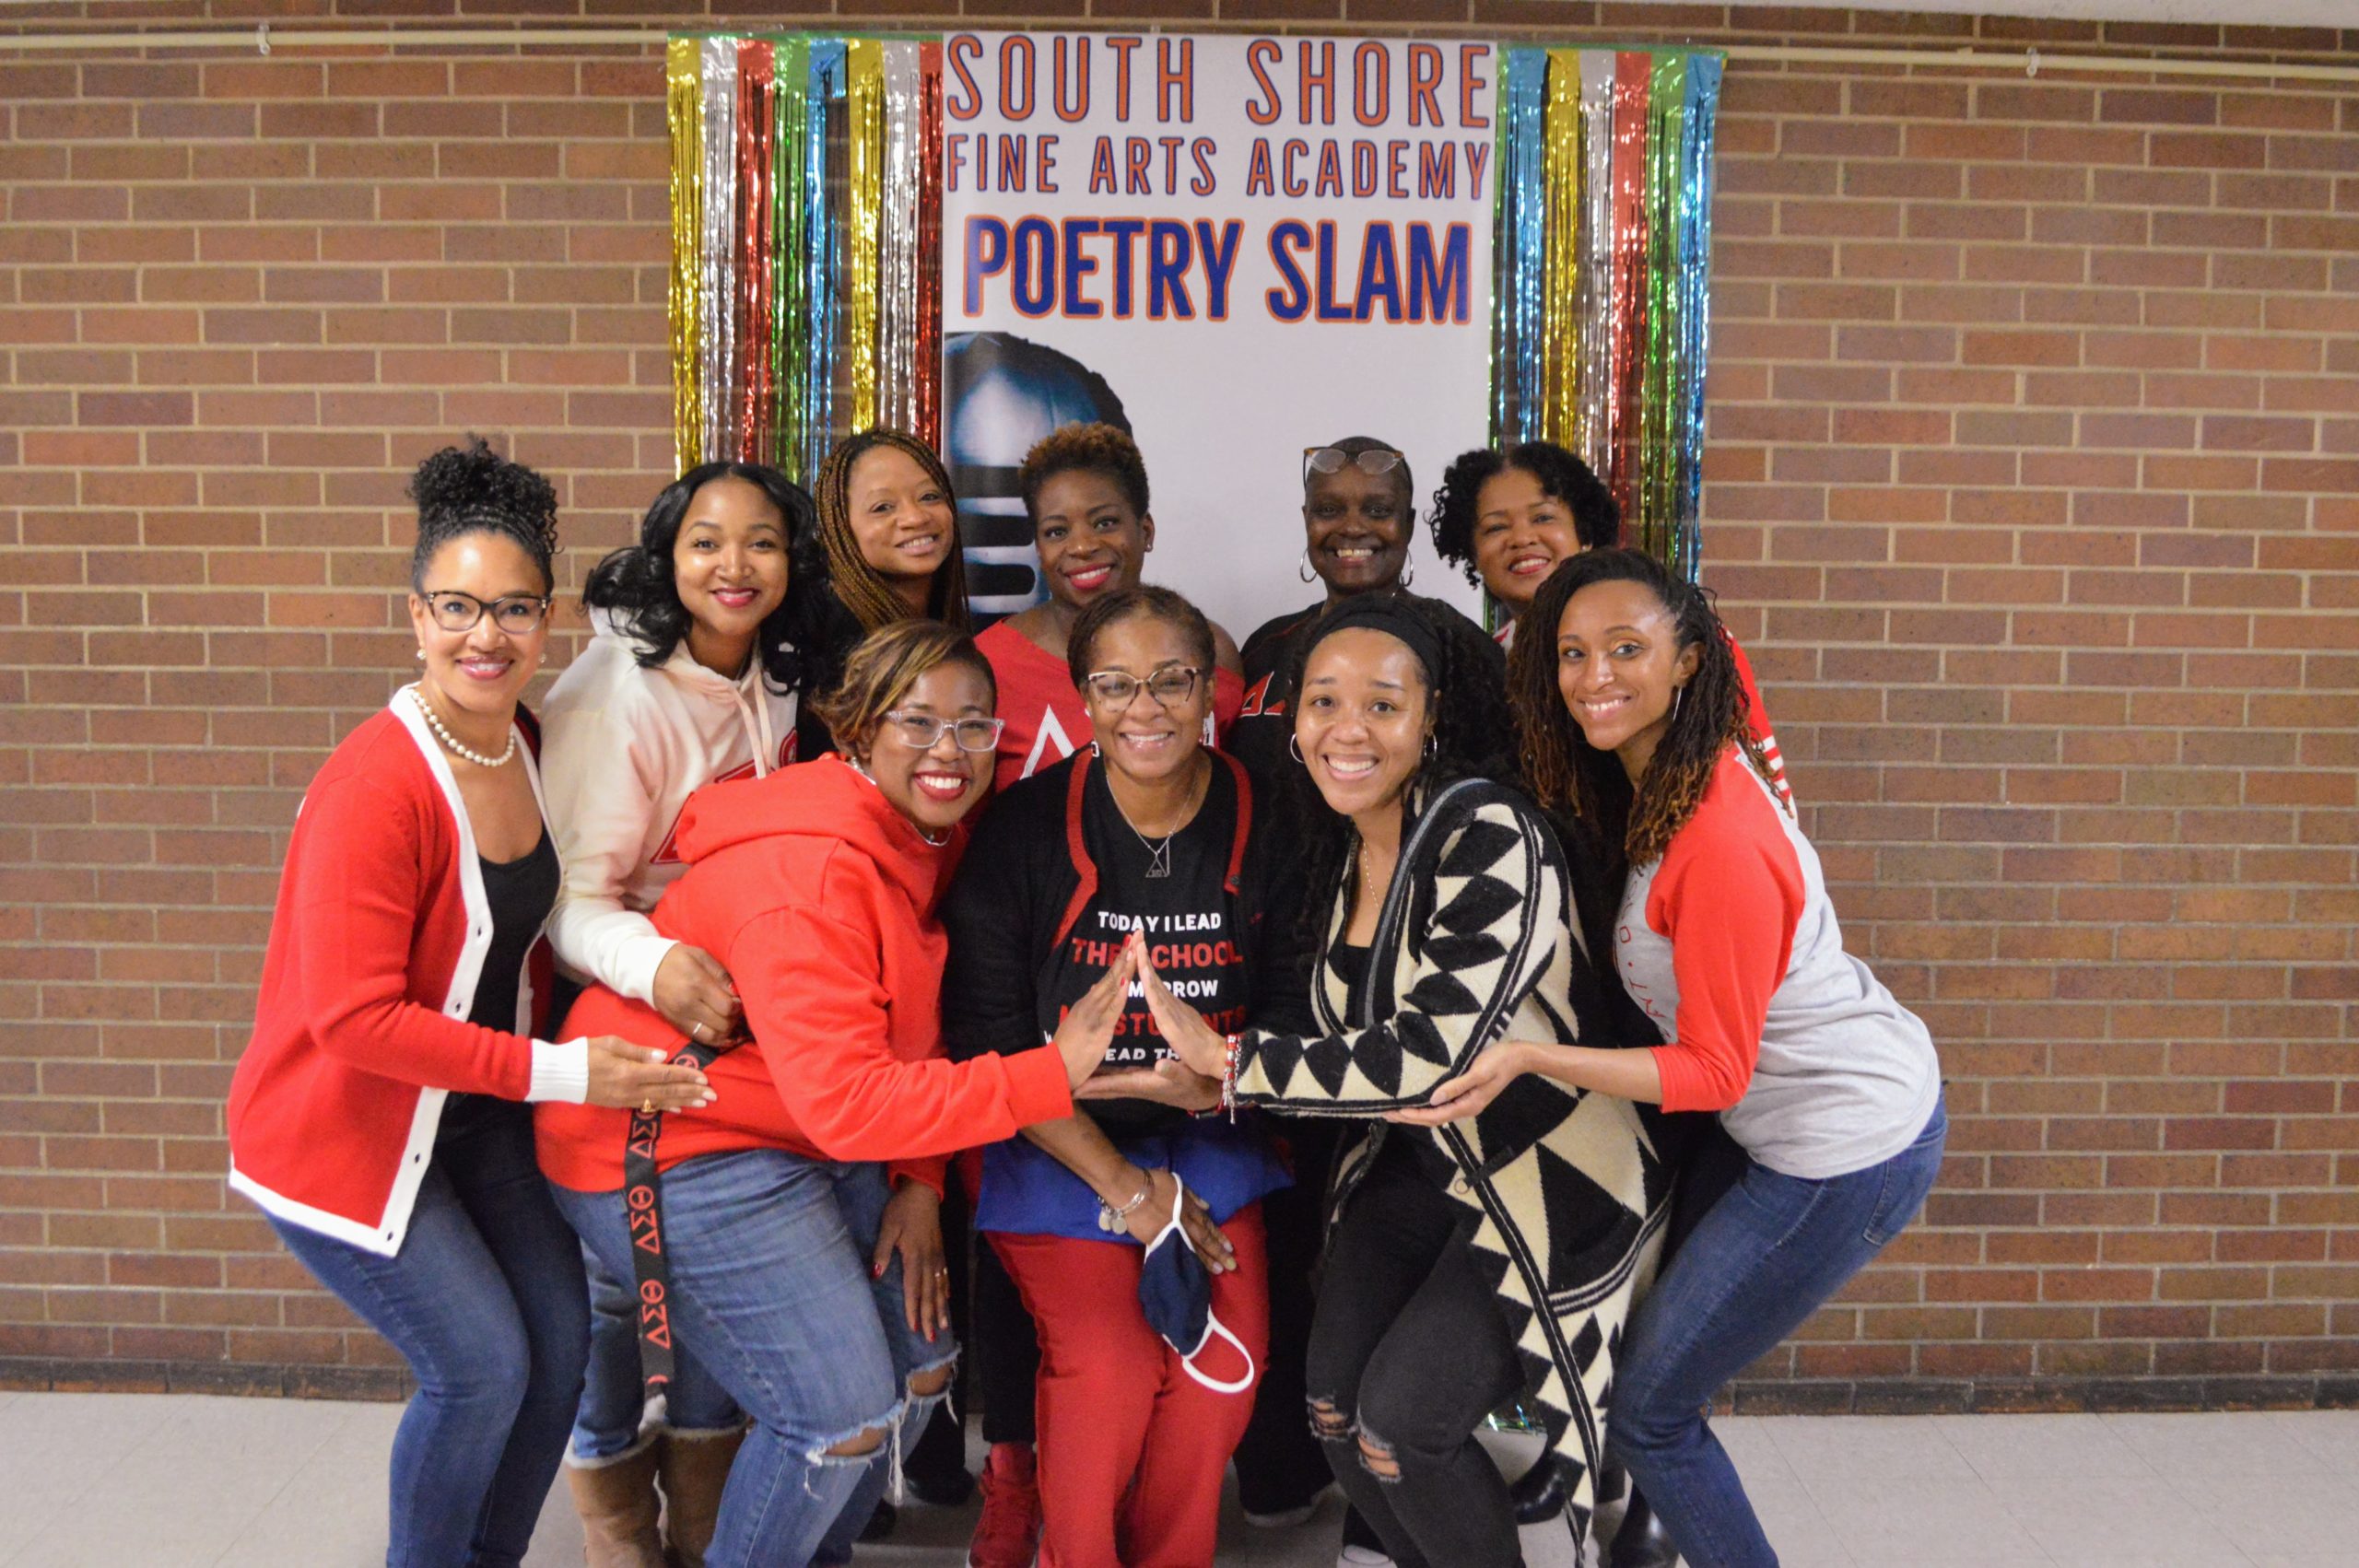 South Shore Poetry Slam group